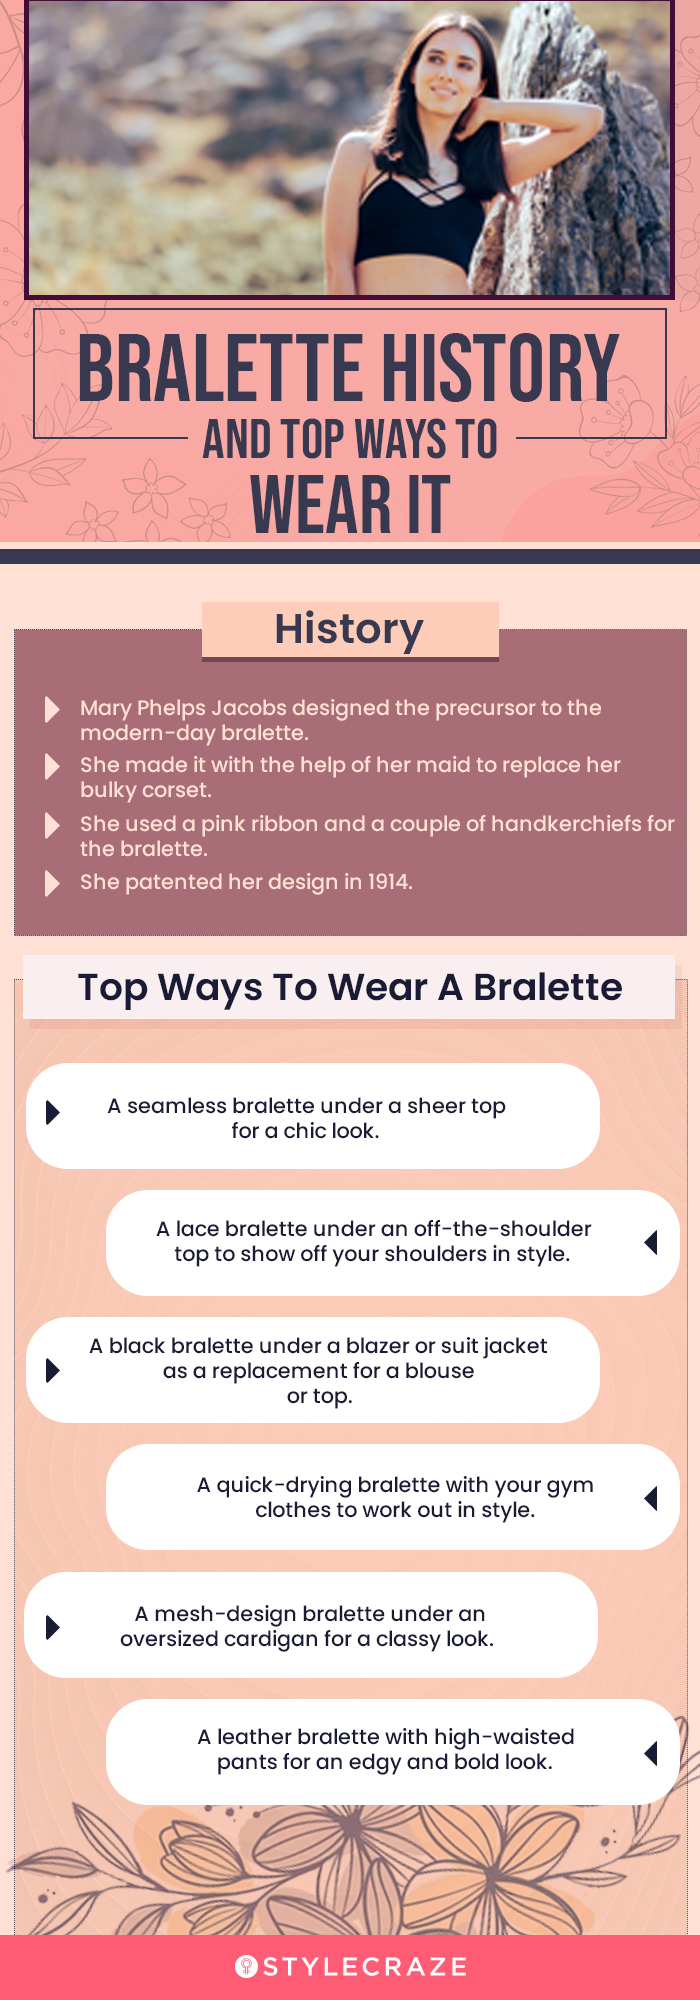 Bralette History And Top Ways To Wear It (infographic)